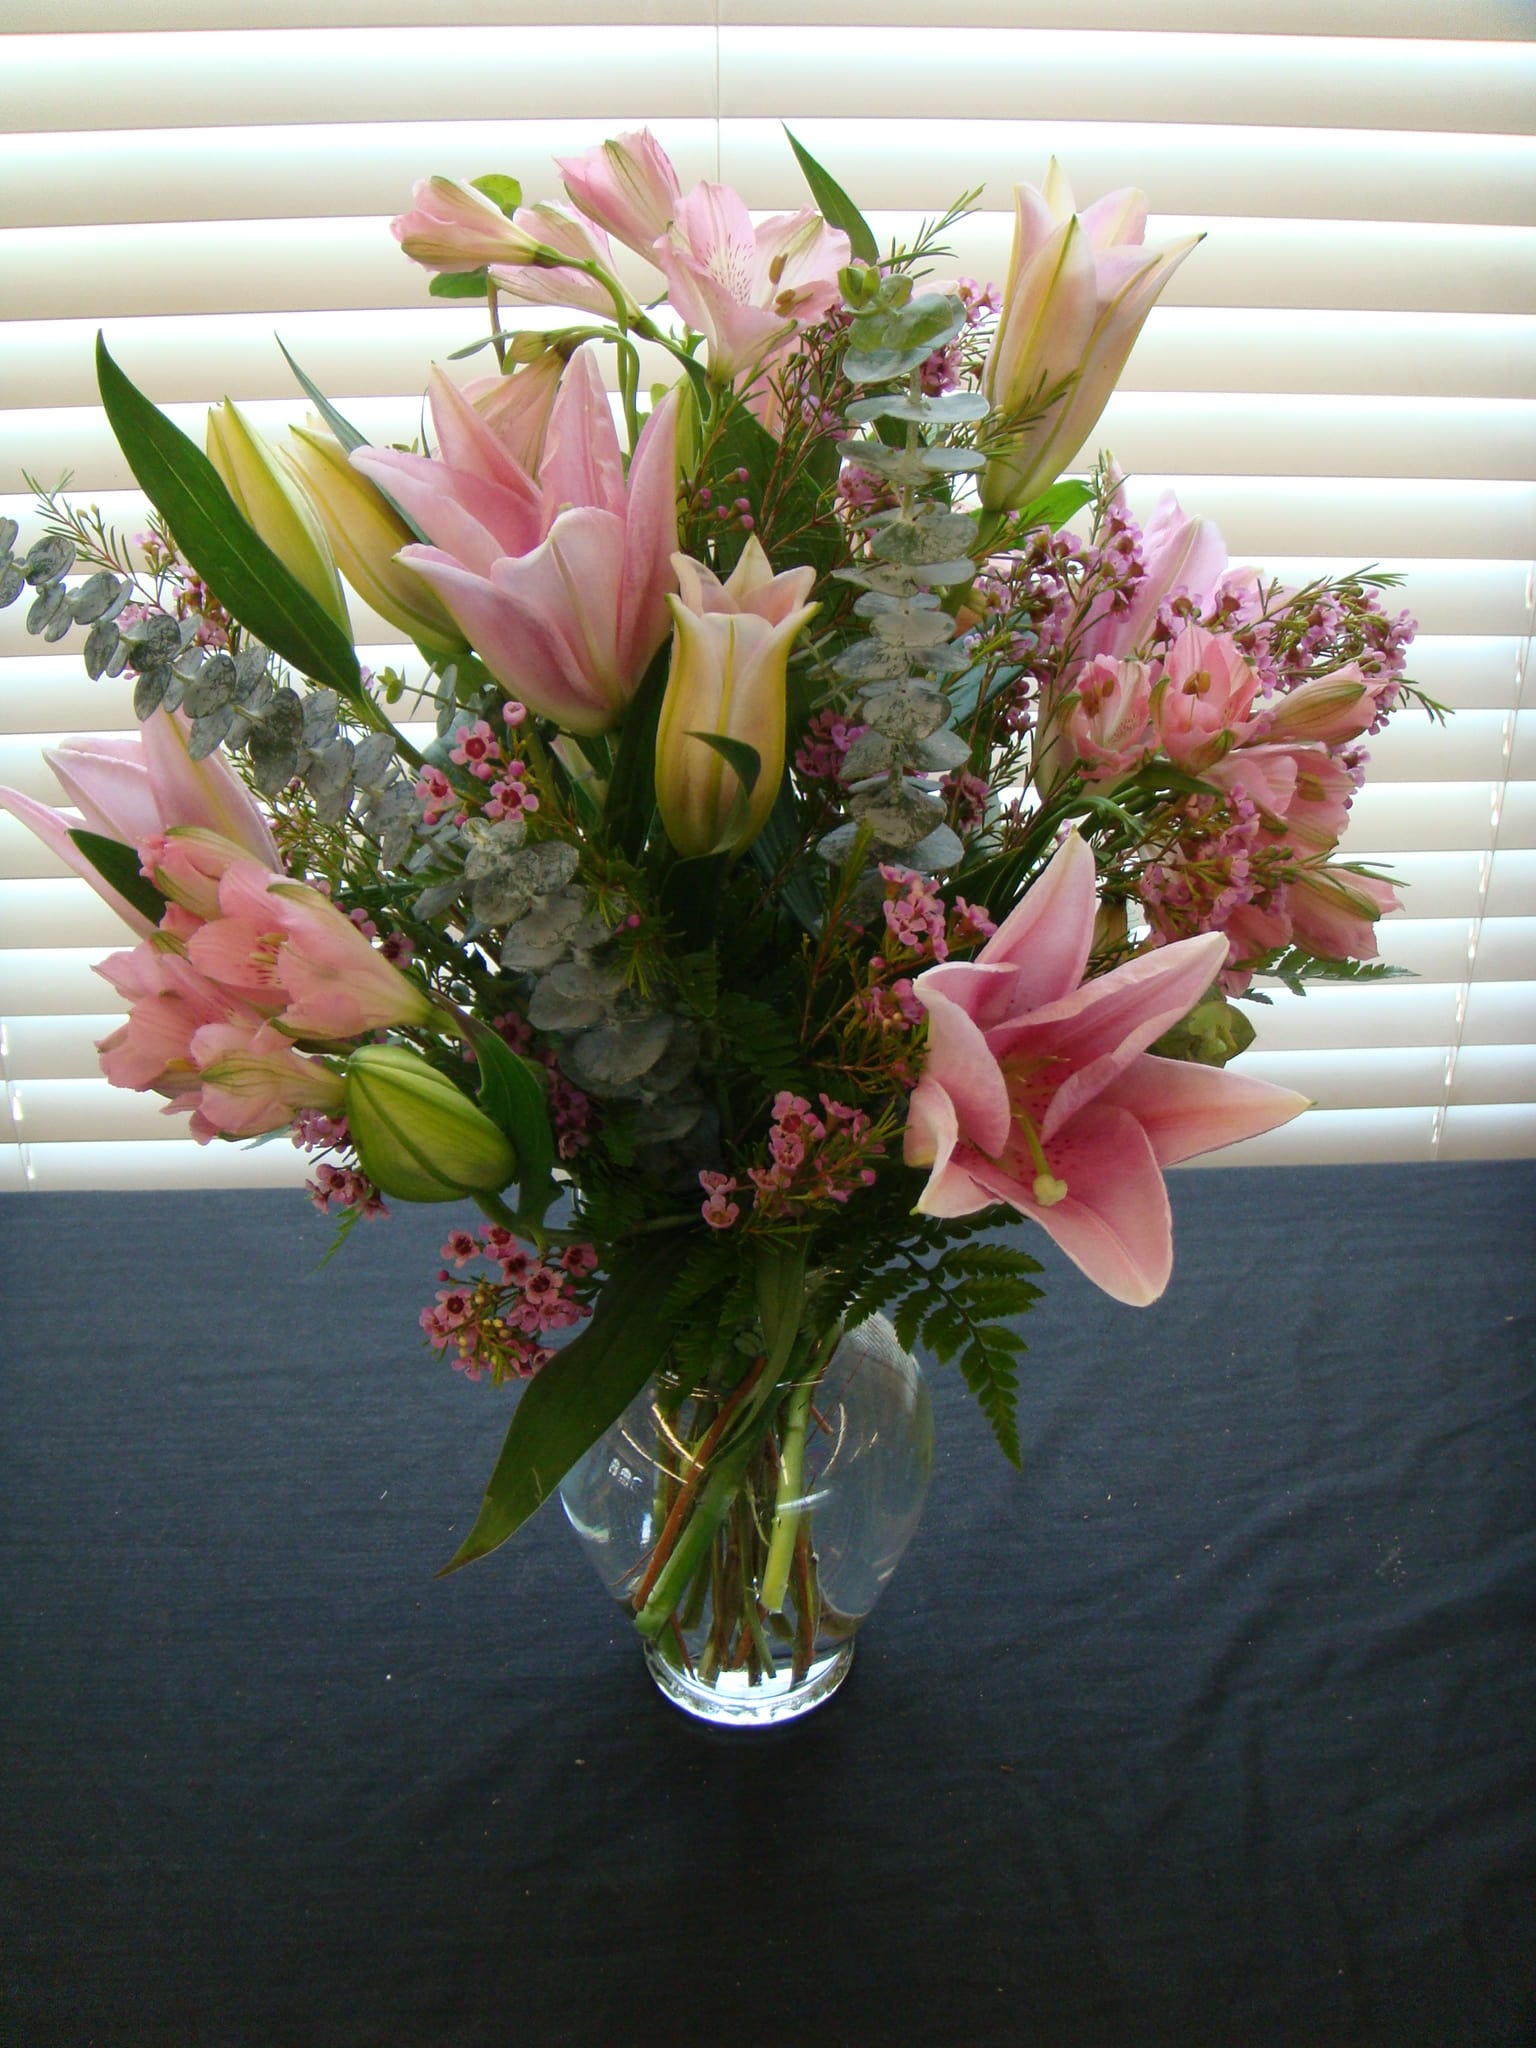 Super Surprise  vase of Lilies    - Super Surprise vase of Lilies   Color of Lilies may vary. The filler will be different than picture due  to shortages in flowers